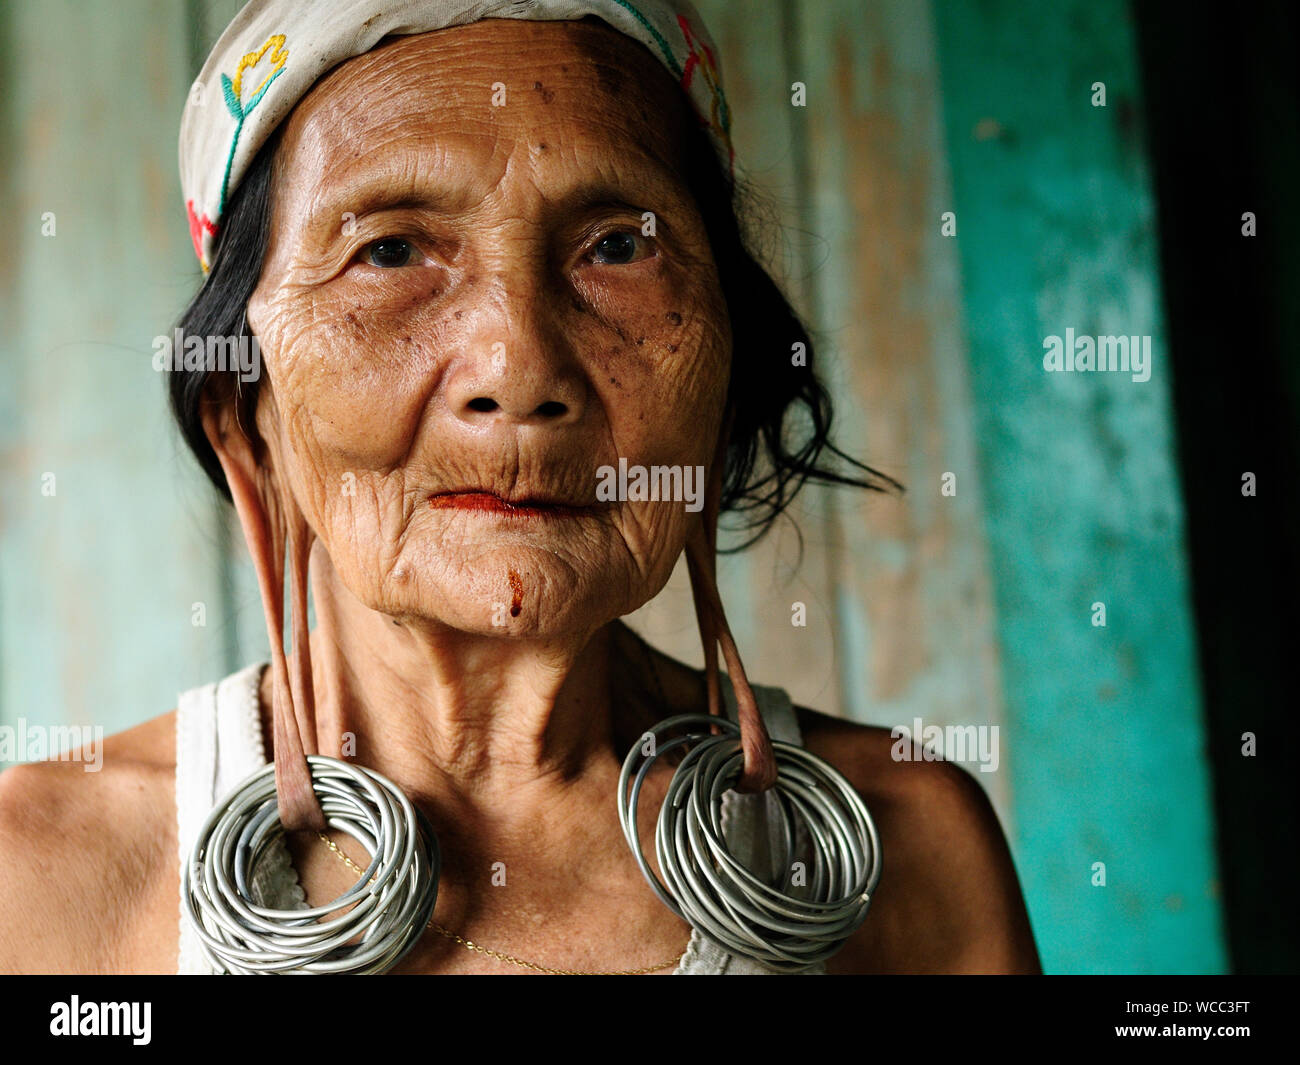 LONG BAGUN, BORNEO, INDONESIA - JULY 07: The older Dayak women with traditional long earlobes and tattoo from Borneo Stock Photo